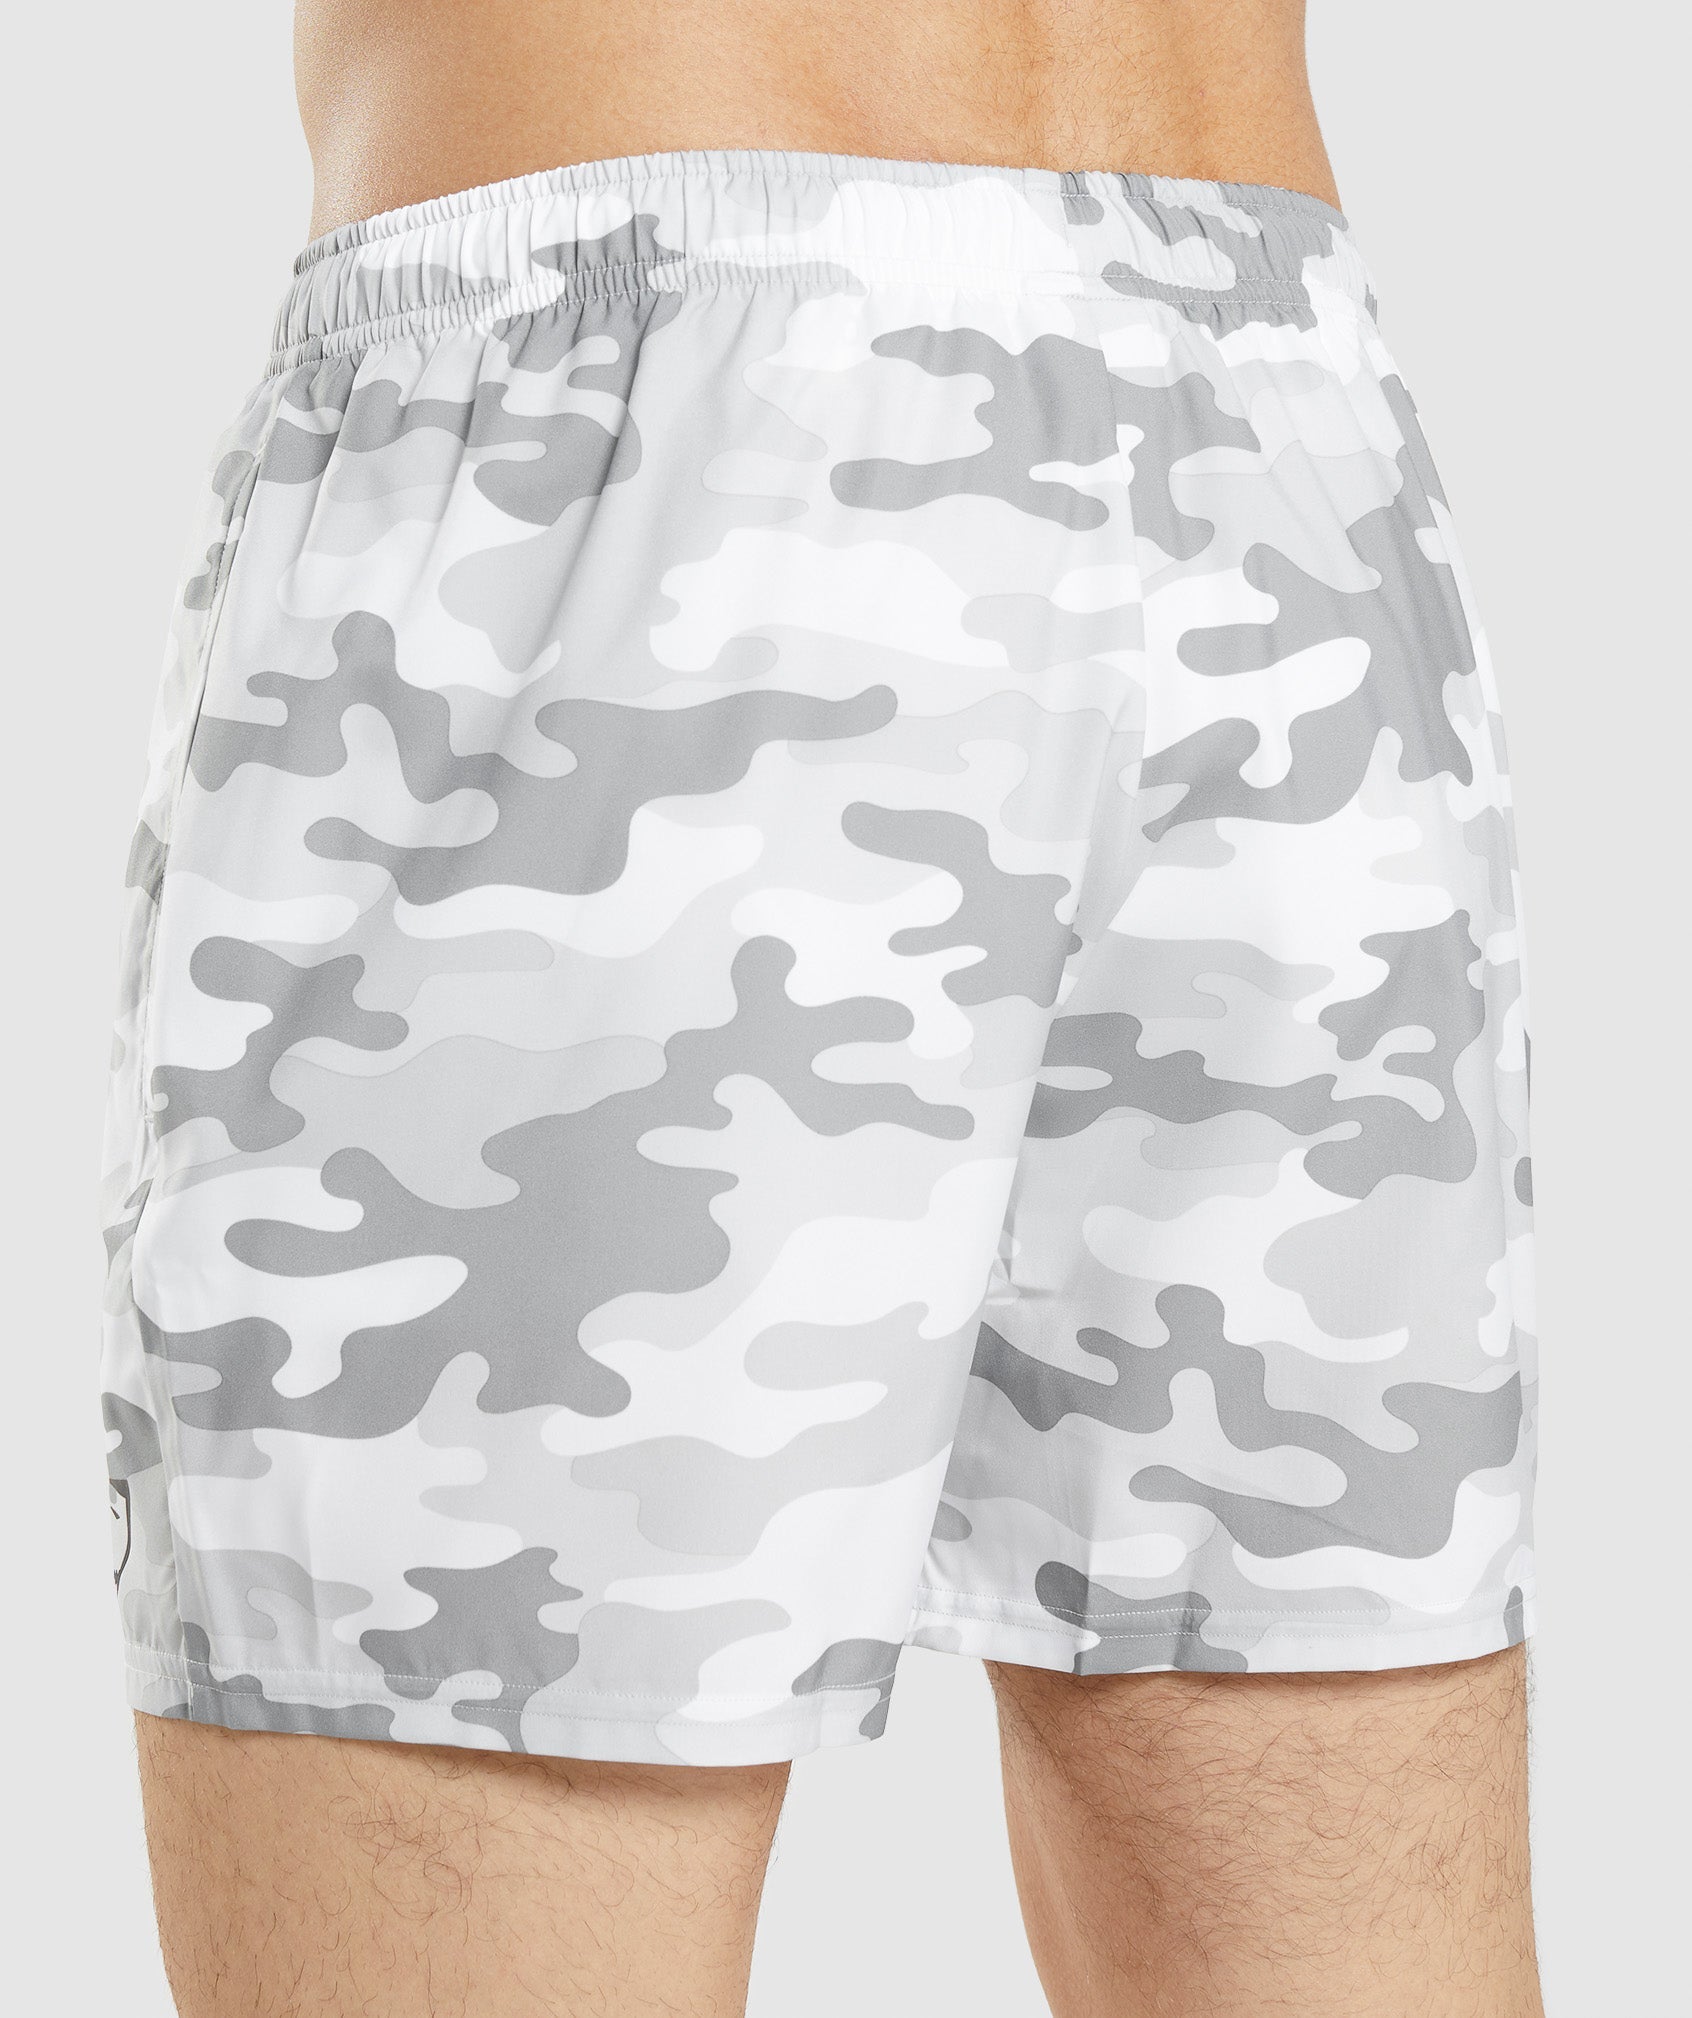 Arrival 5" Shorts in Light Grey Print - view 5